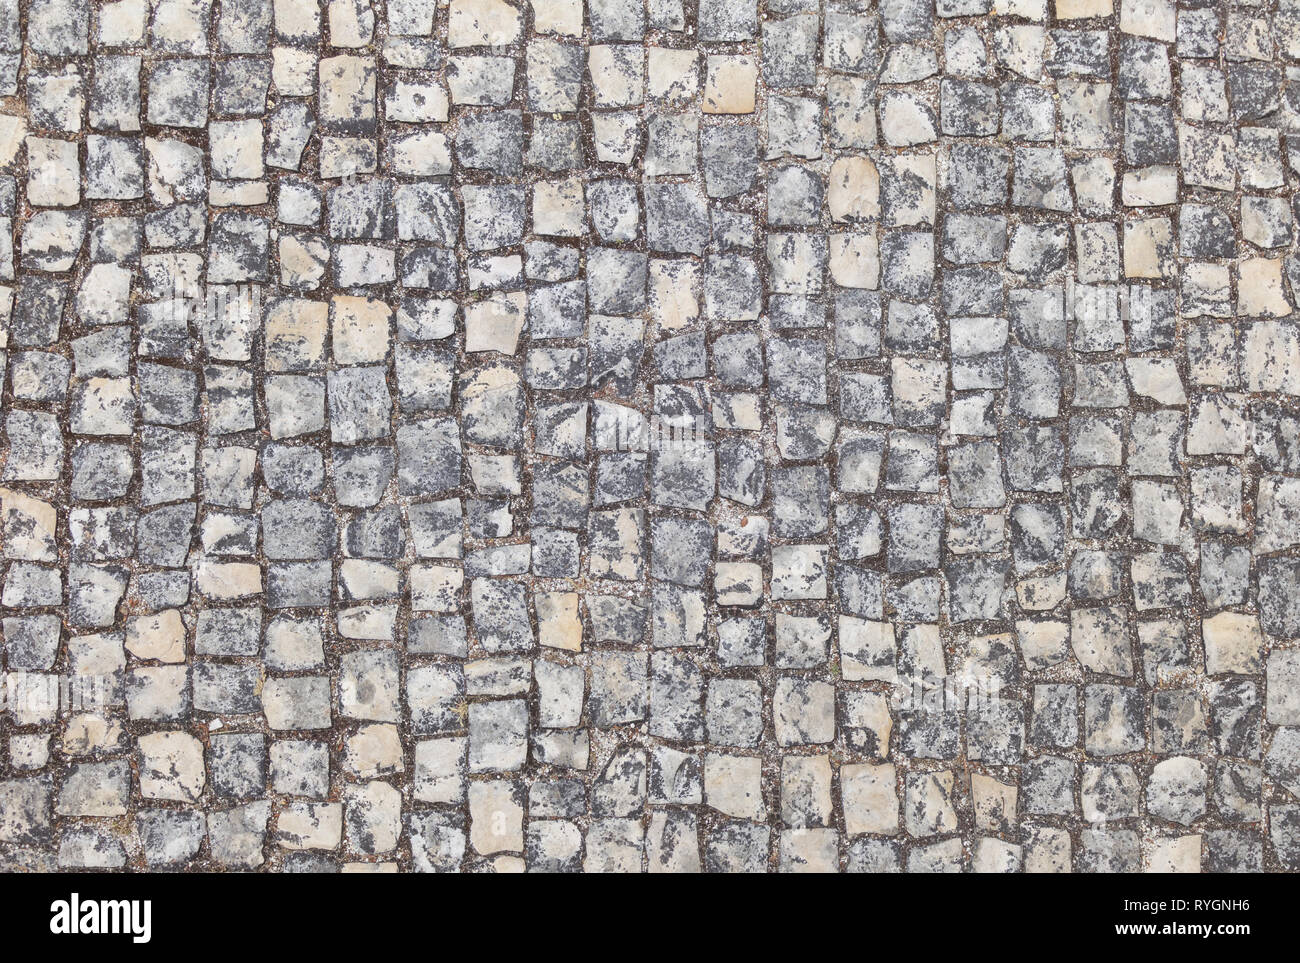 Stone pavement texture close up. Natural background Stock Photo